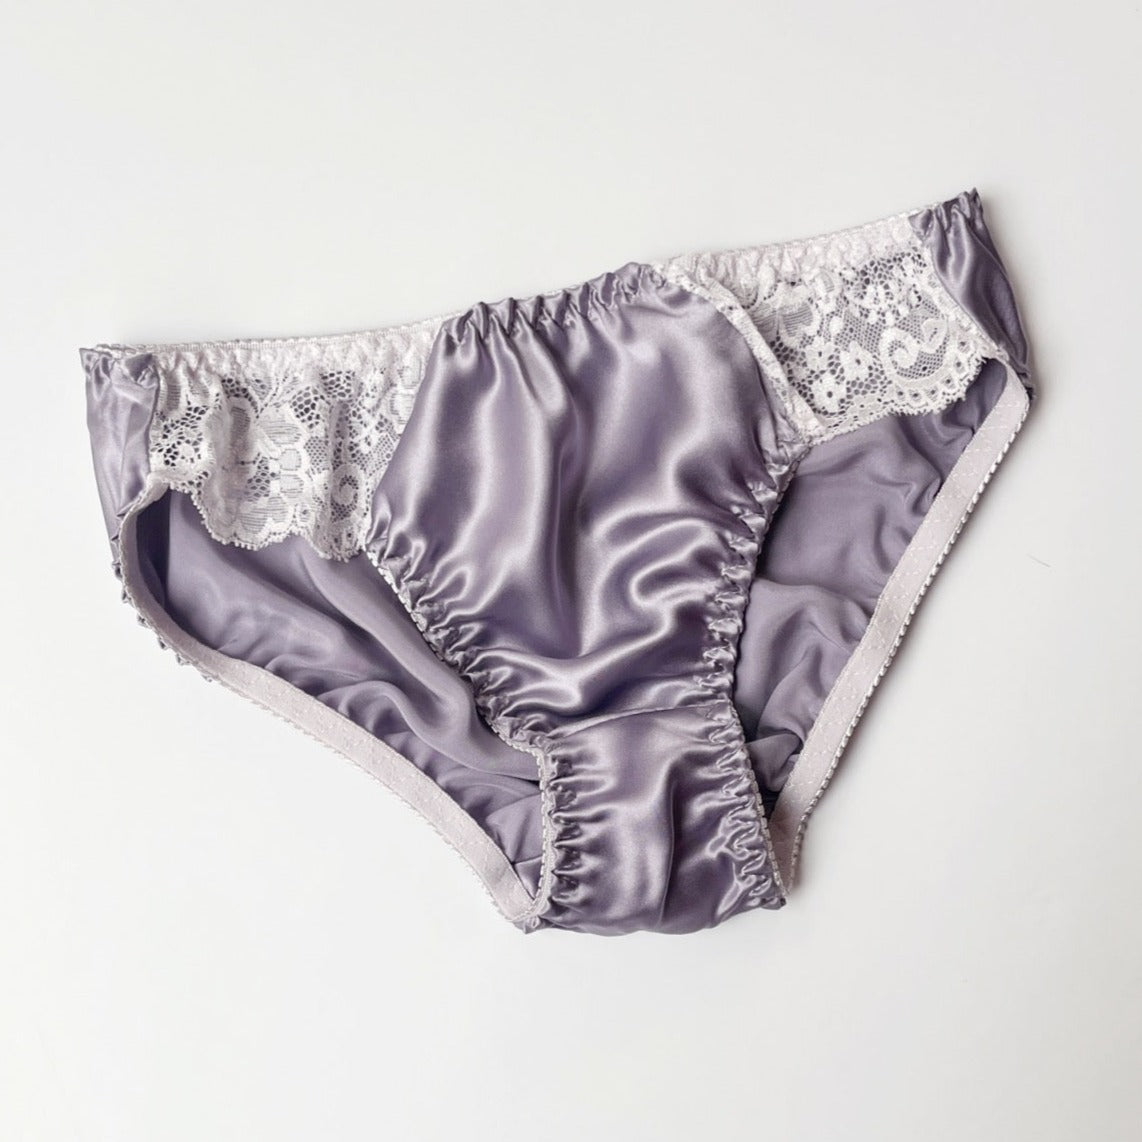 lavender grey pure silk underwear for women, silk panties, made in Canada silk lingerie and apparel